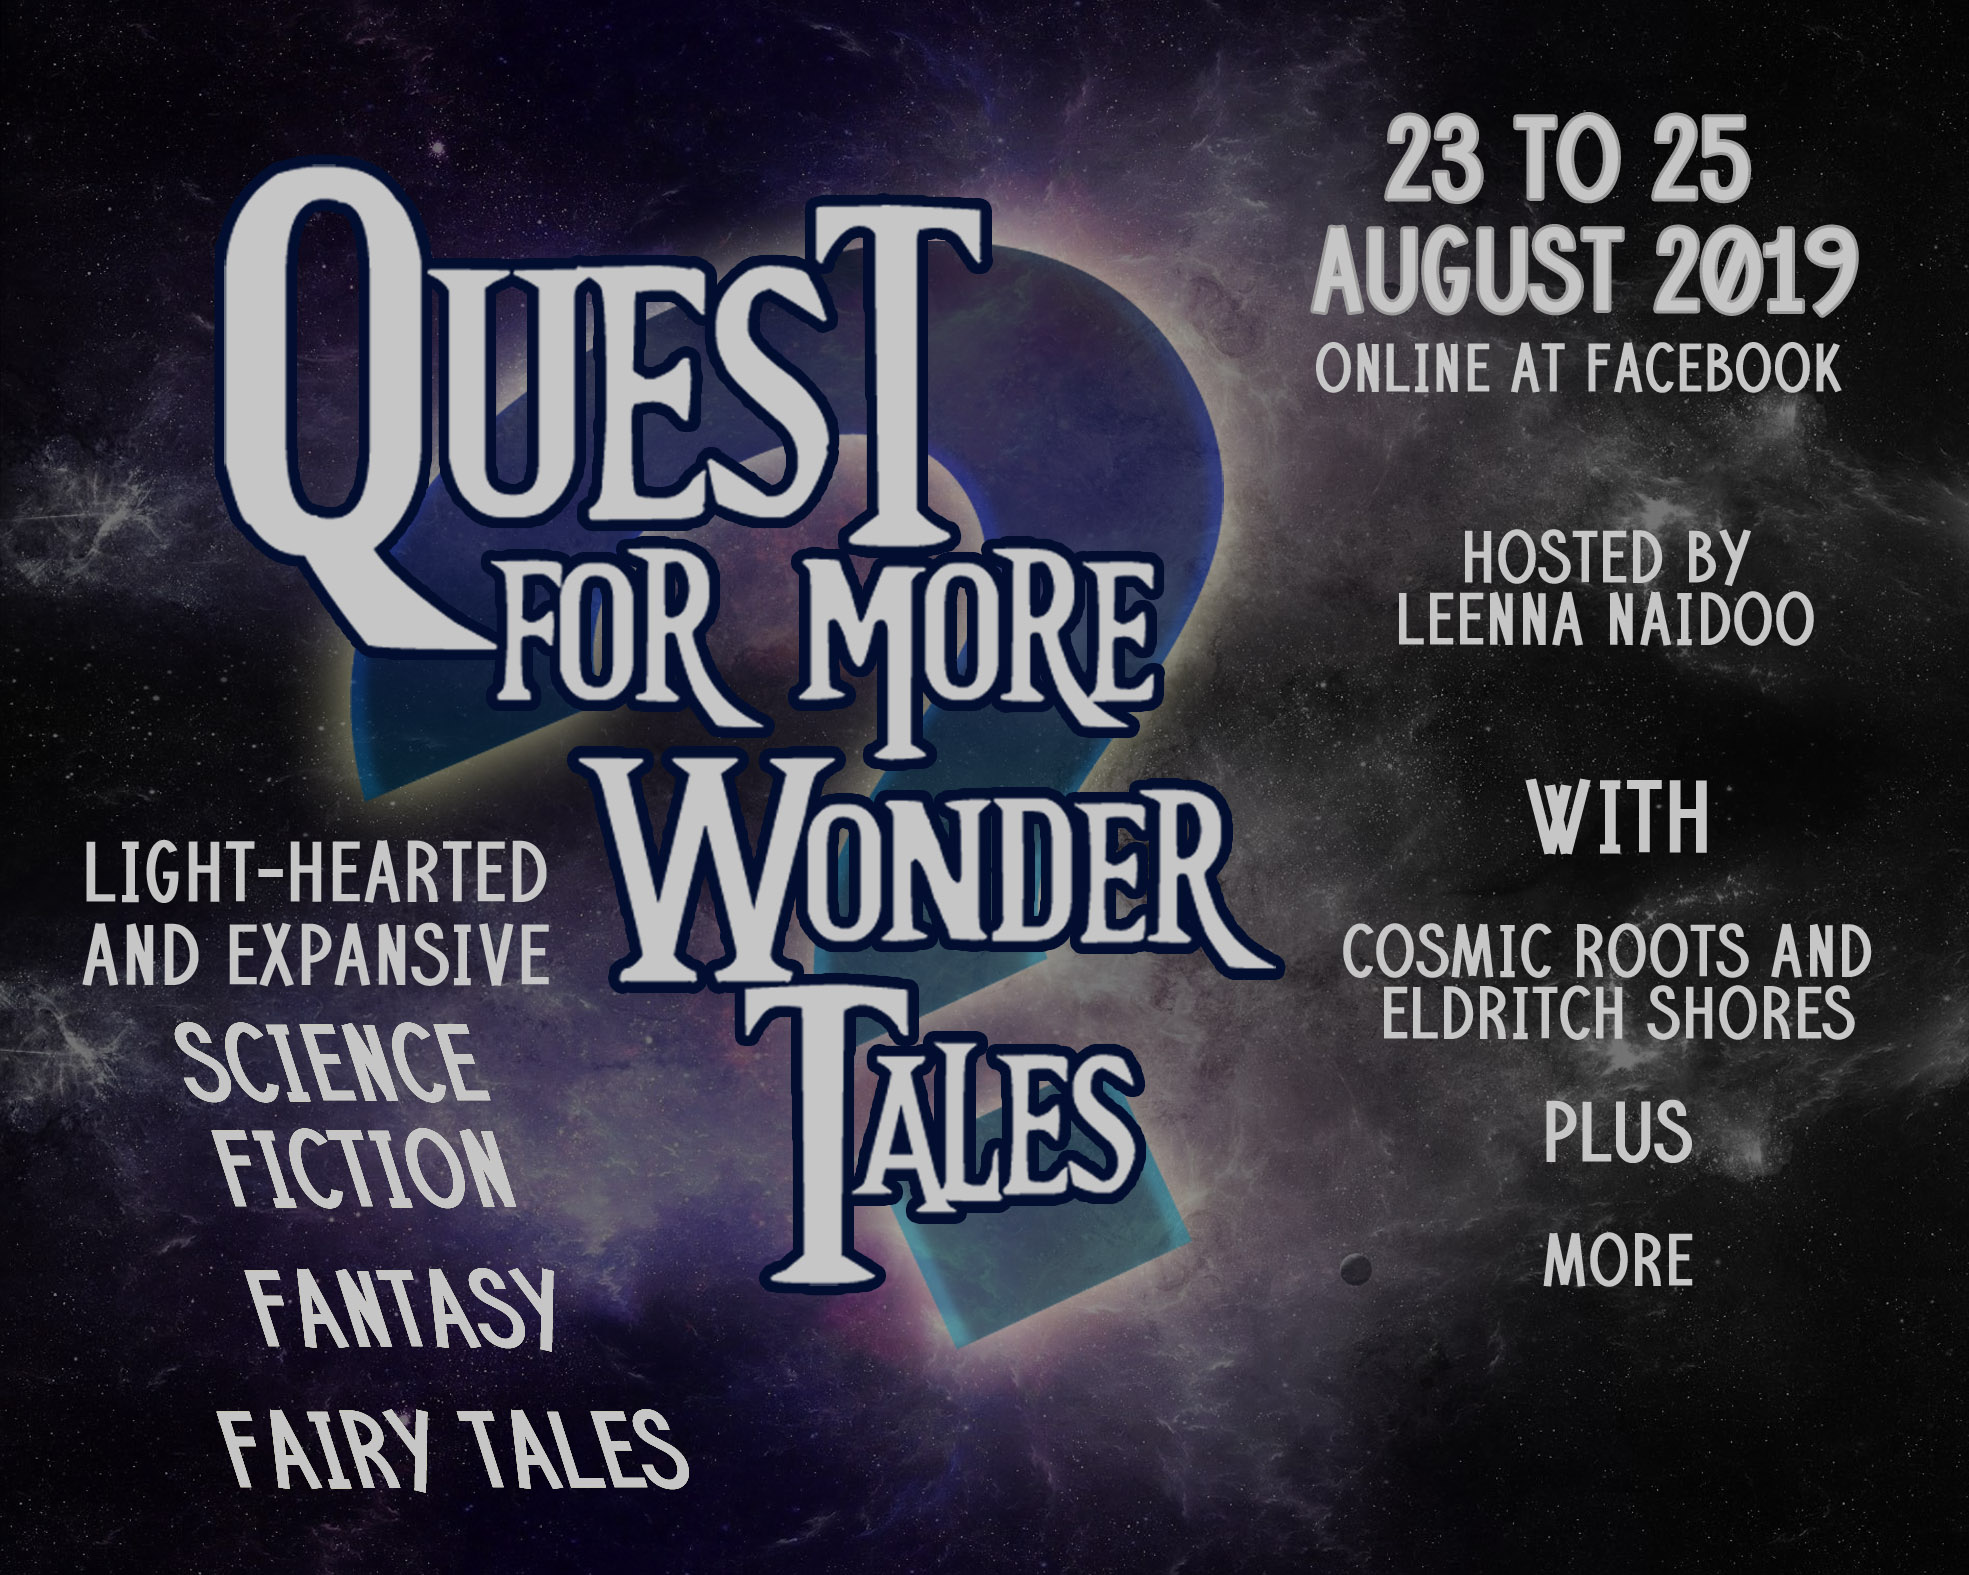 Quest for more Wonder Tales FB event info